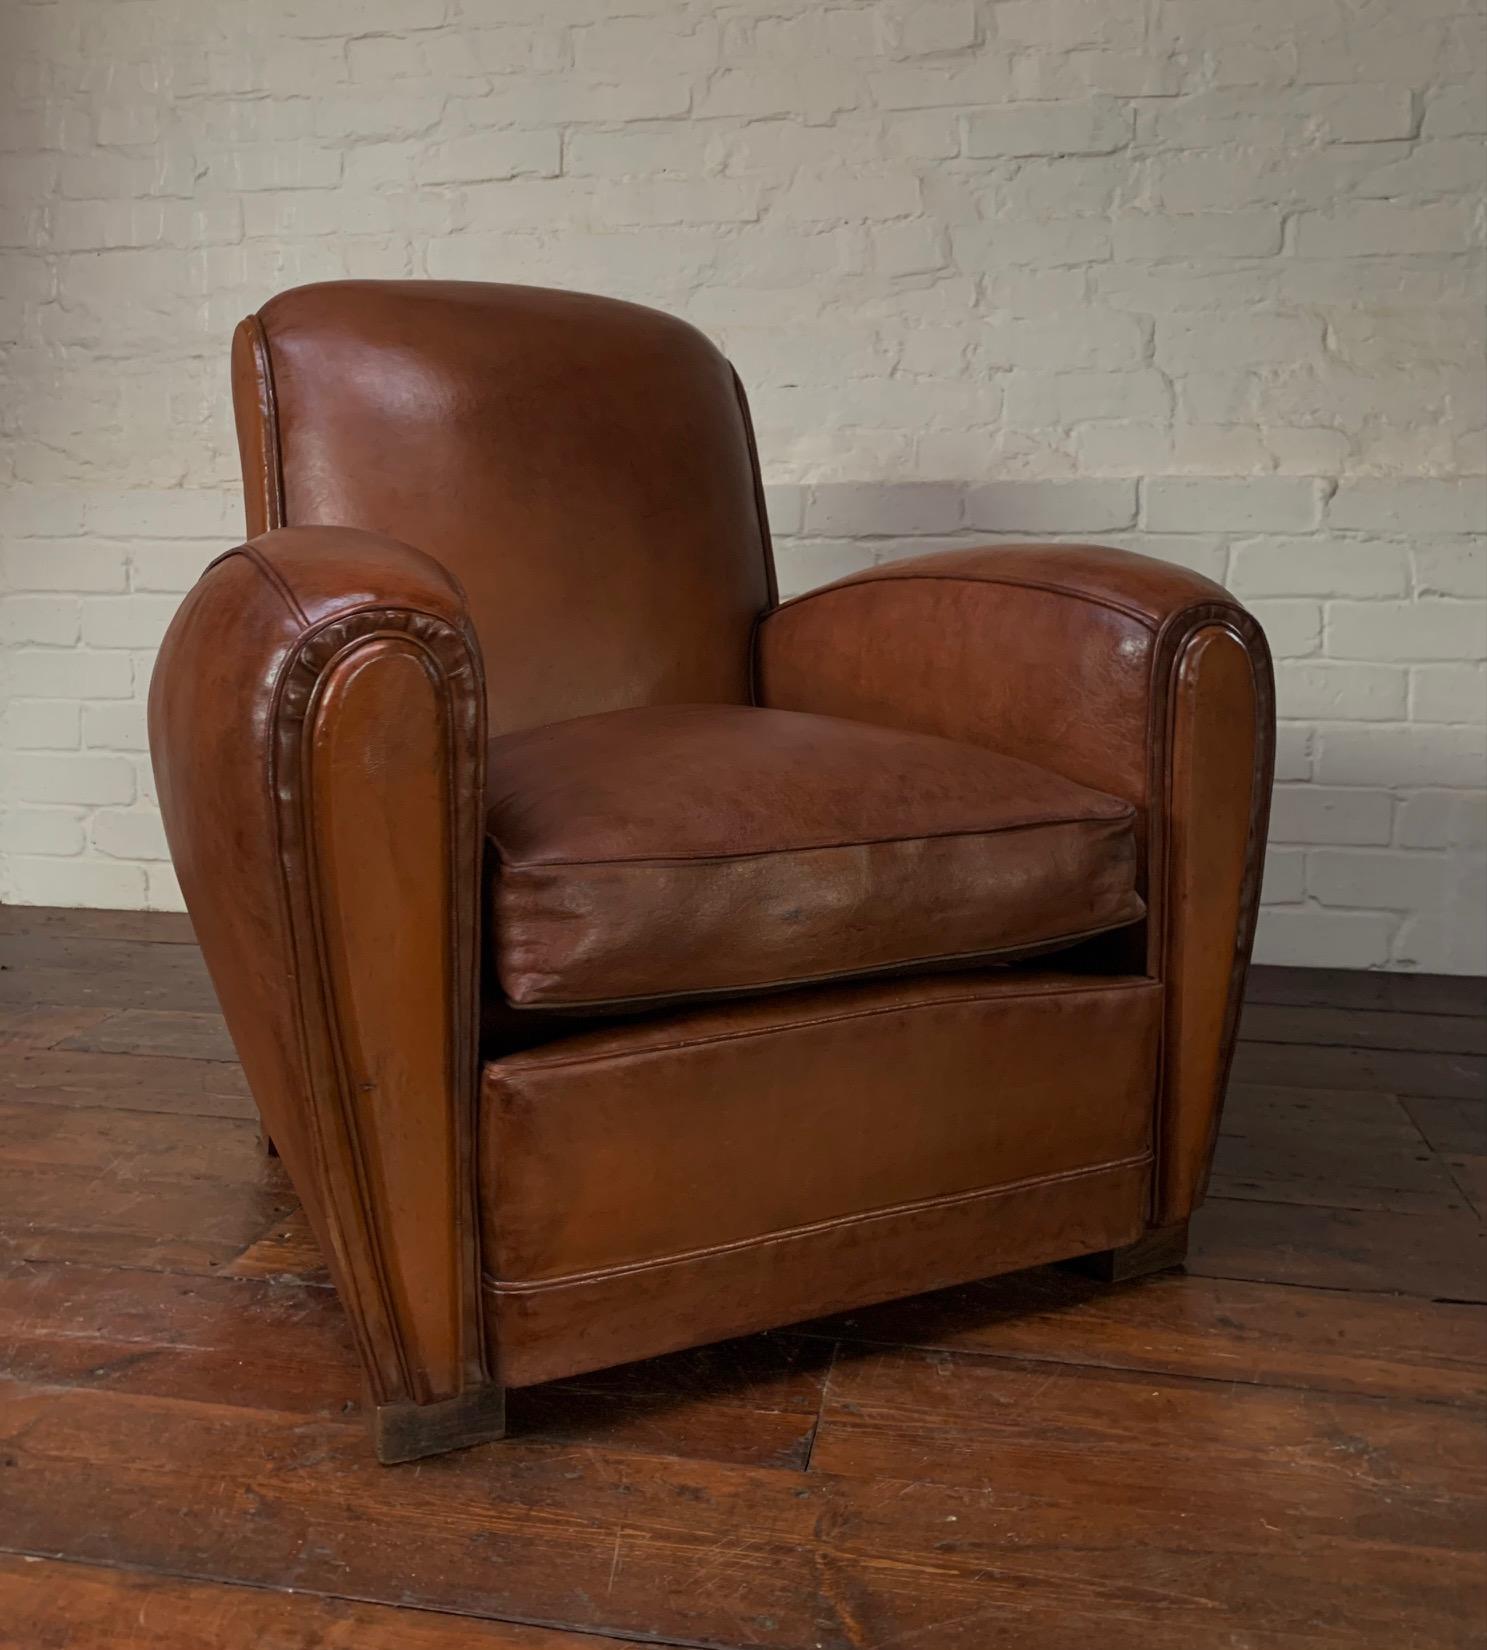 This lovely and classic single chair is in a beautiful and original condition. The leather colour is best described as toffee, with areas of chestnut. The condition is as good as it gets, with no rips or previous repairs. This chair has been very